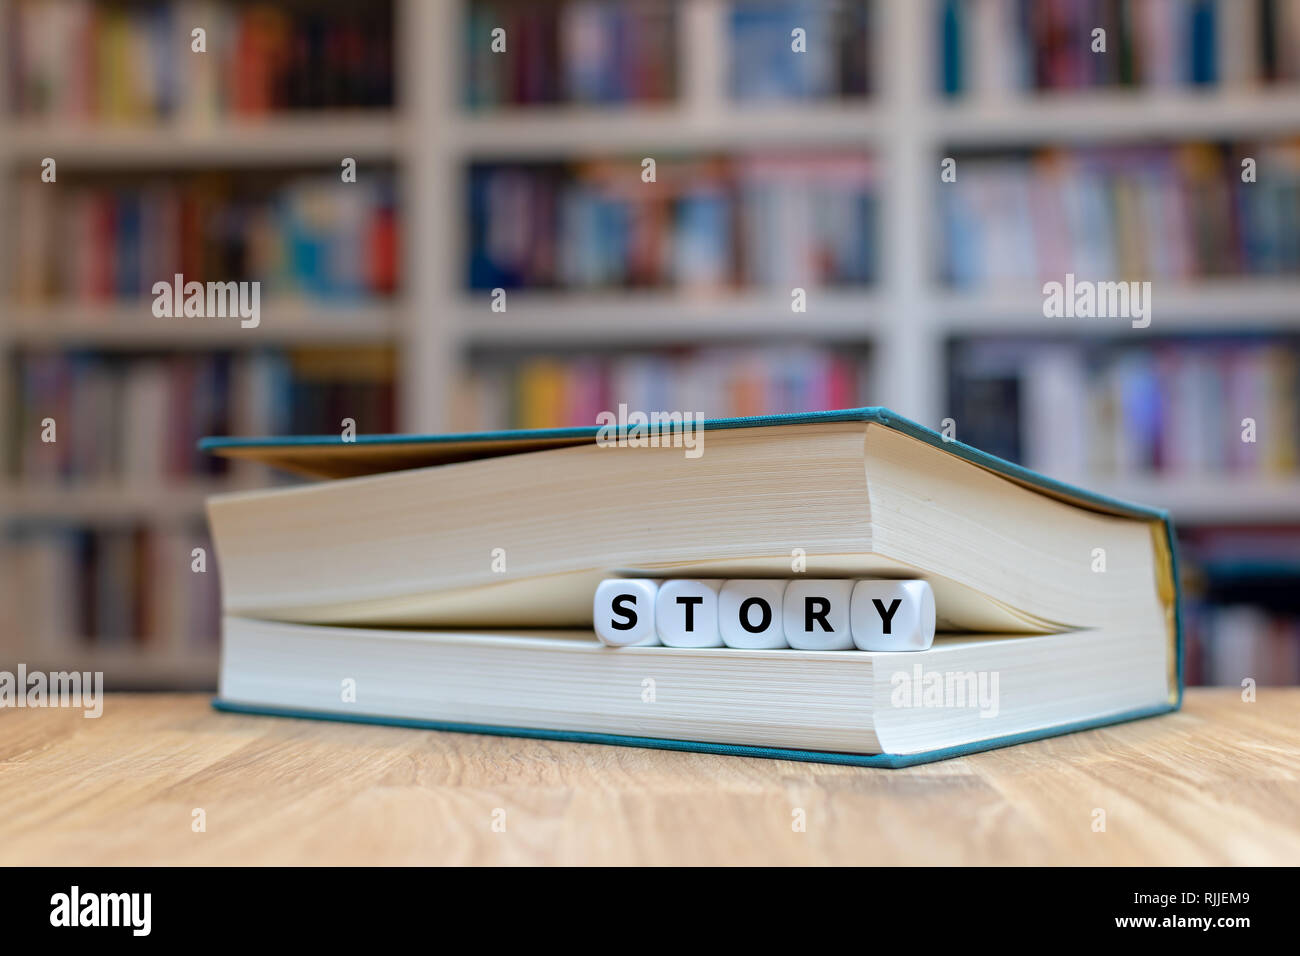 Dice in a book form the word 'story'. Book is lying on a wooden desk in a library. Stock Photo